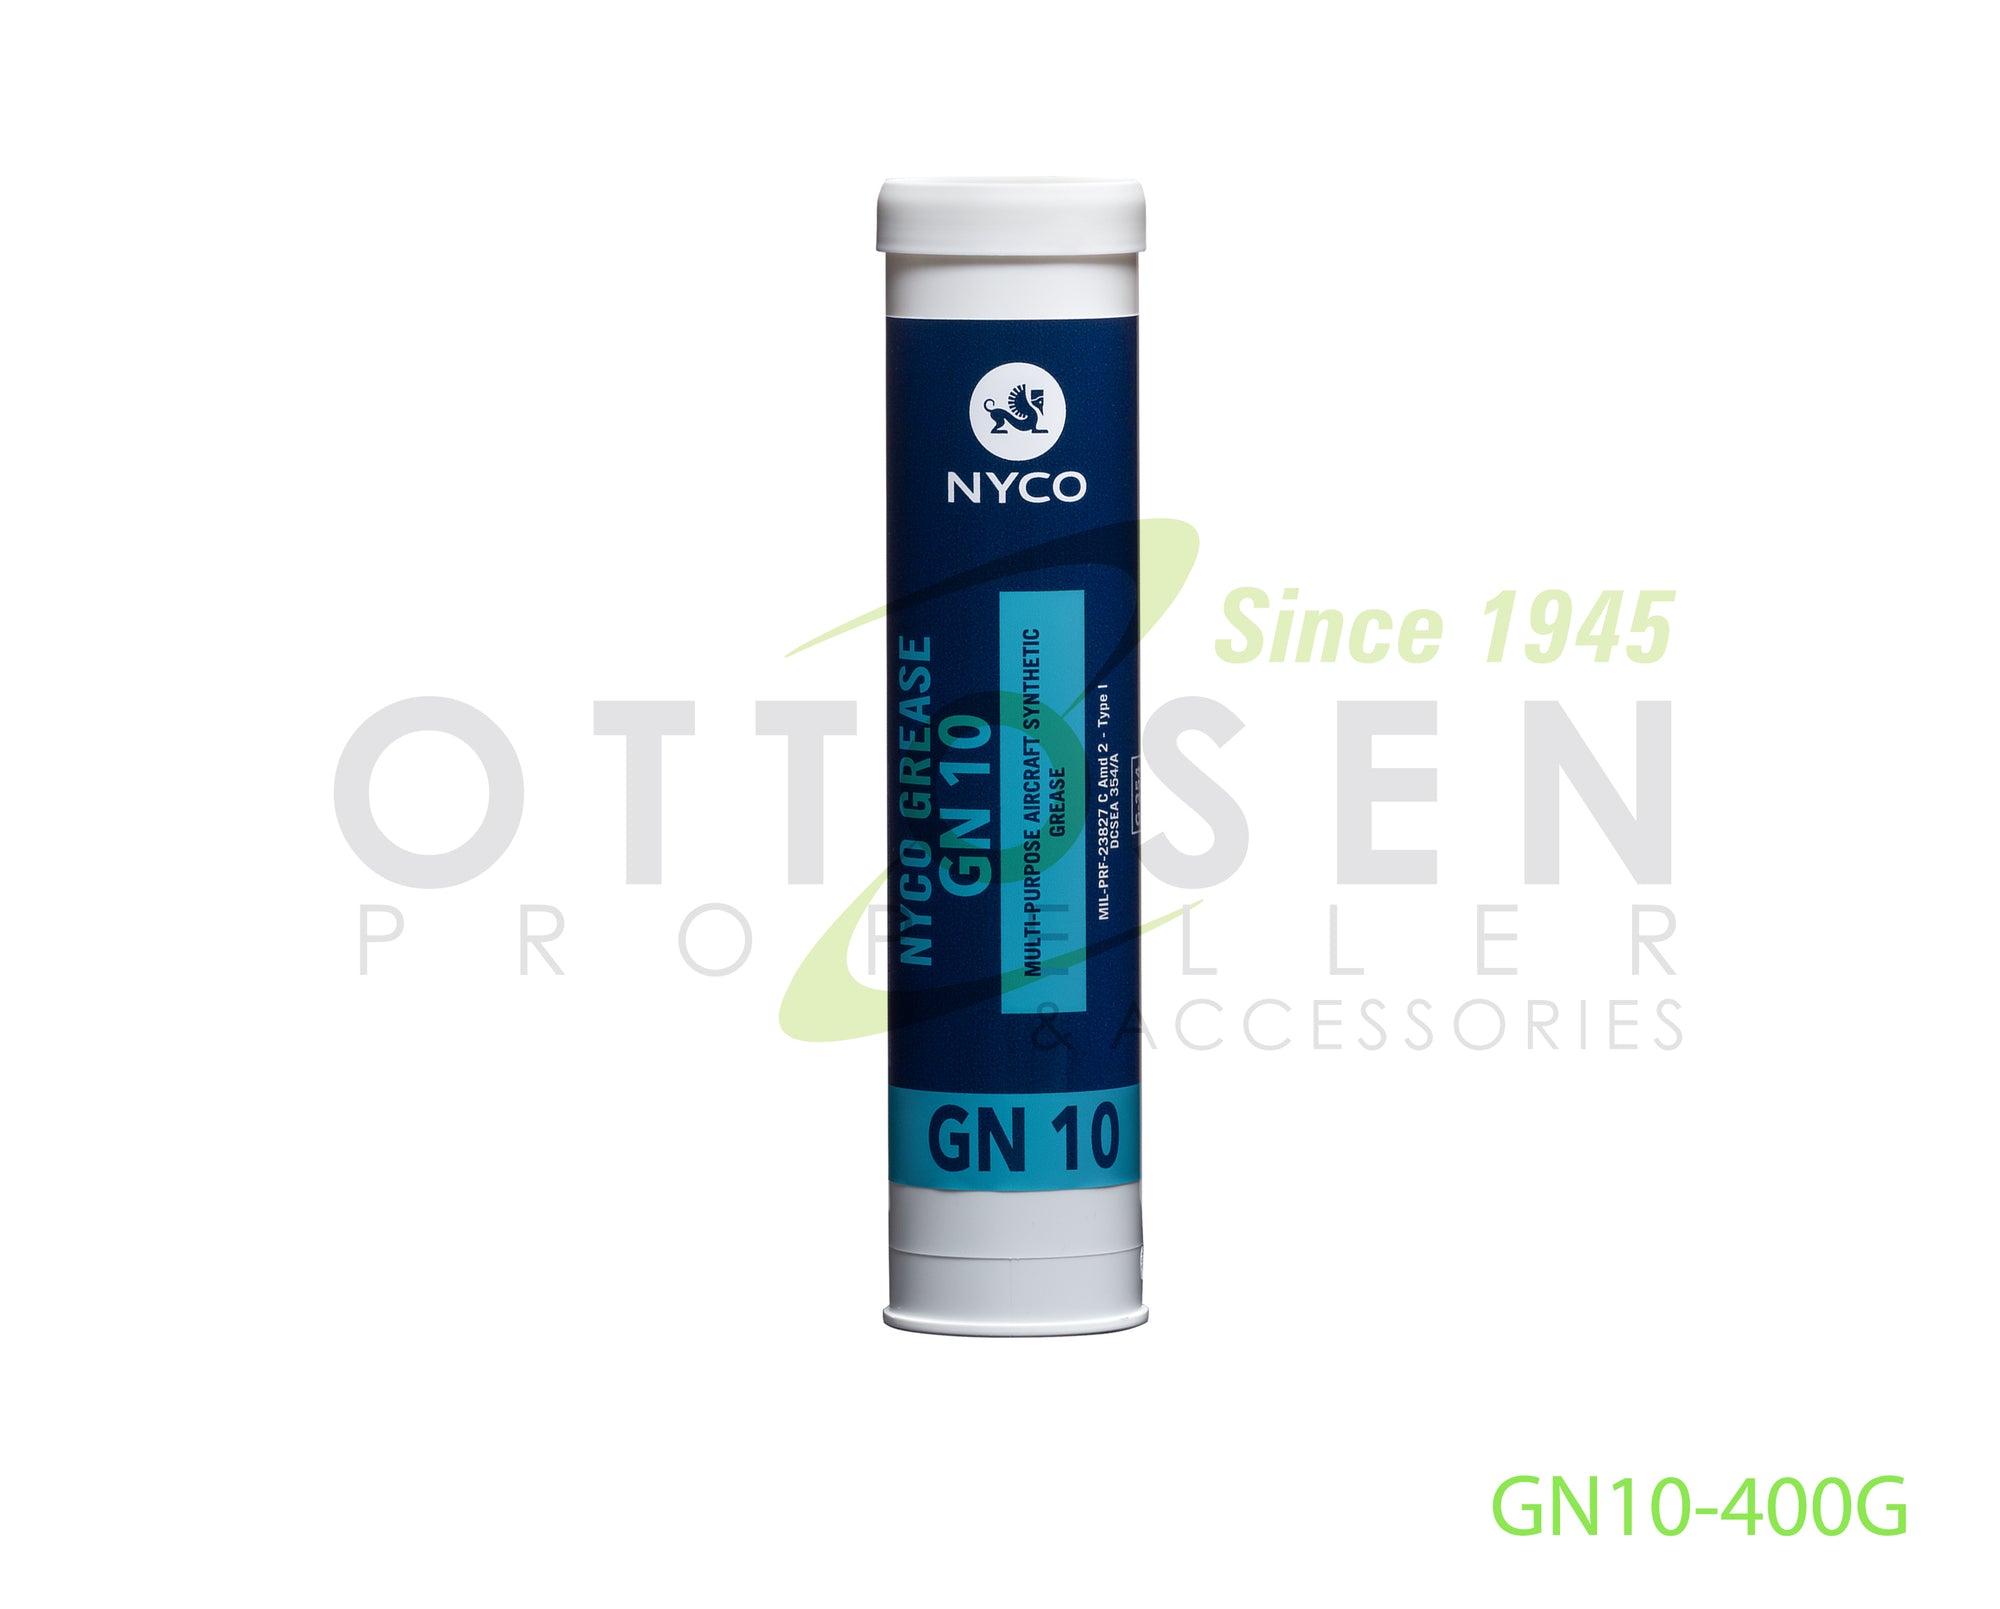 GN10-400G-NYCO-GREASE-PICTURE-1